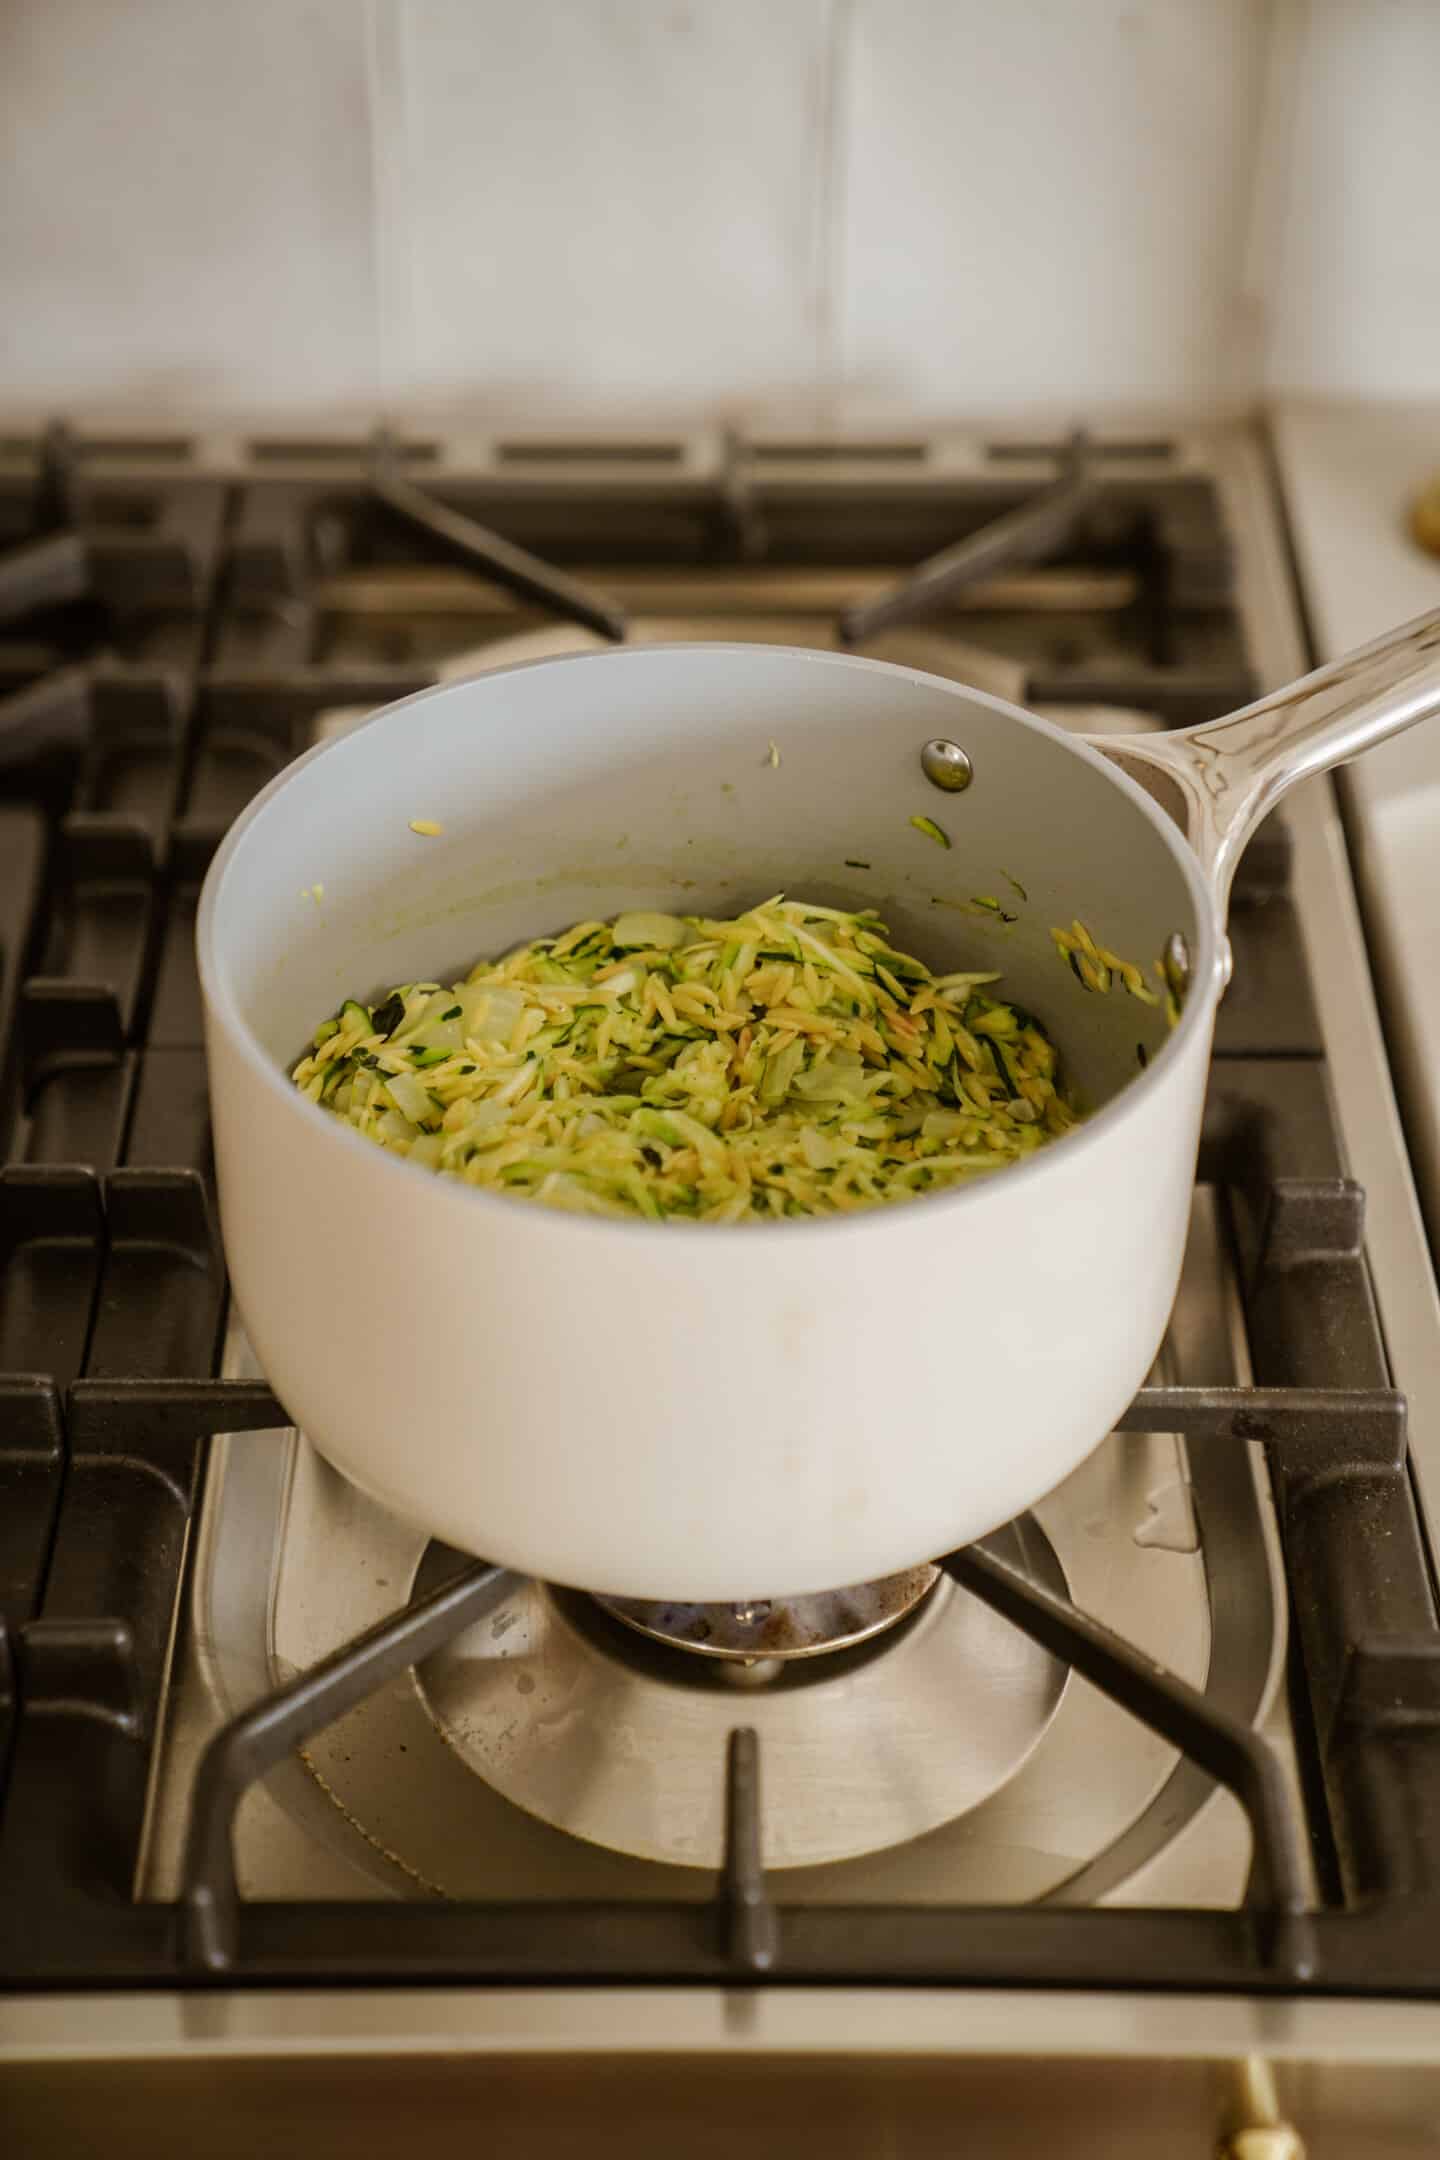 Orzo being cooked in pot